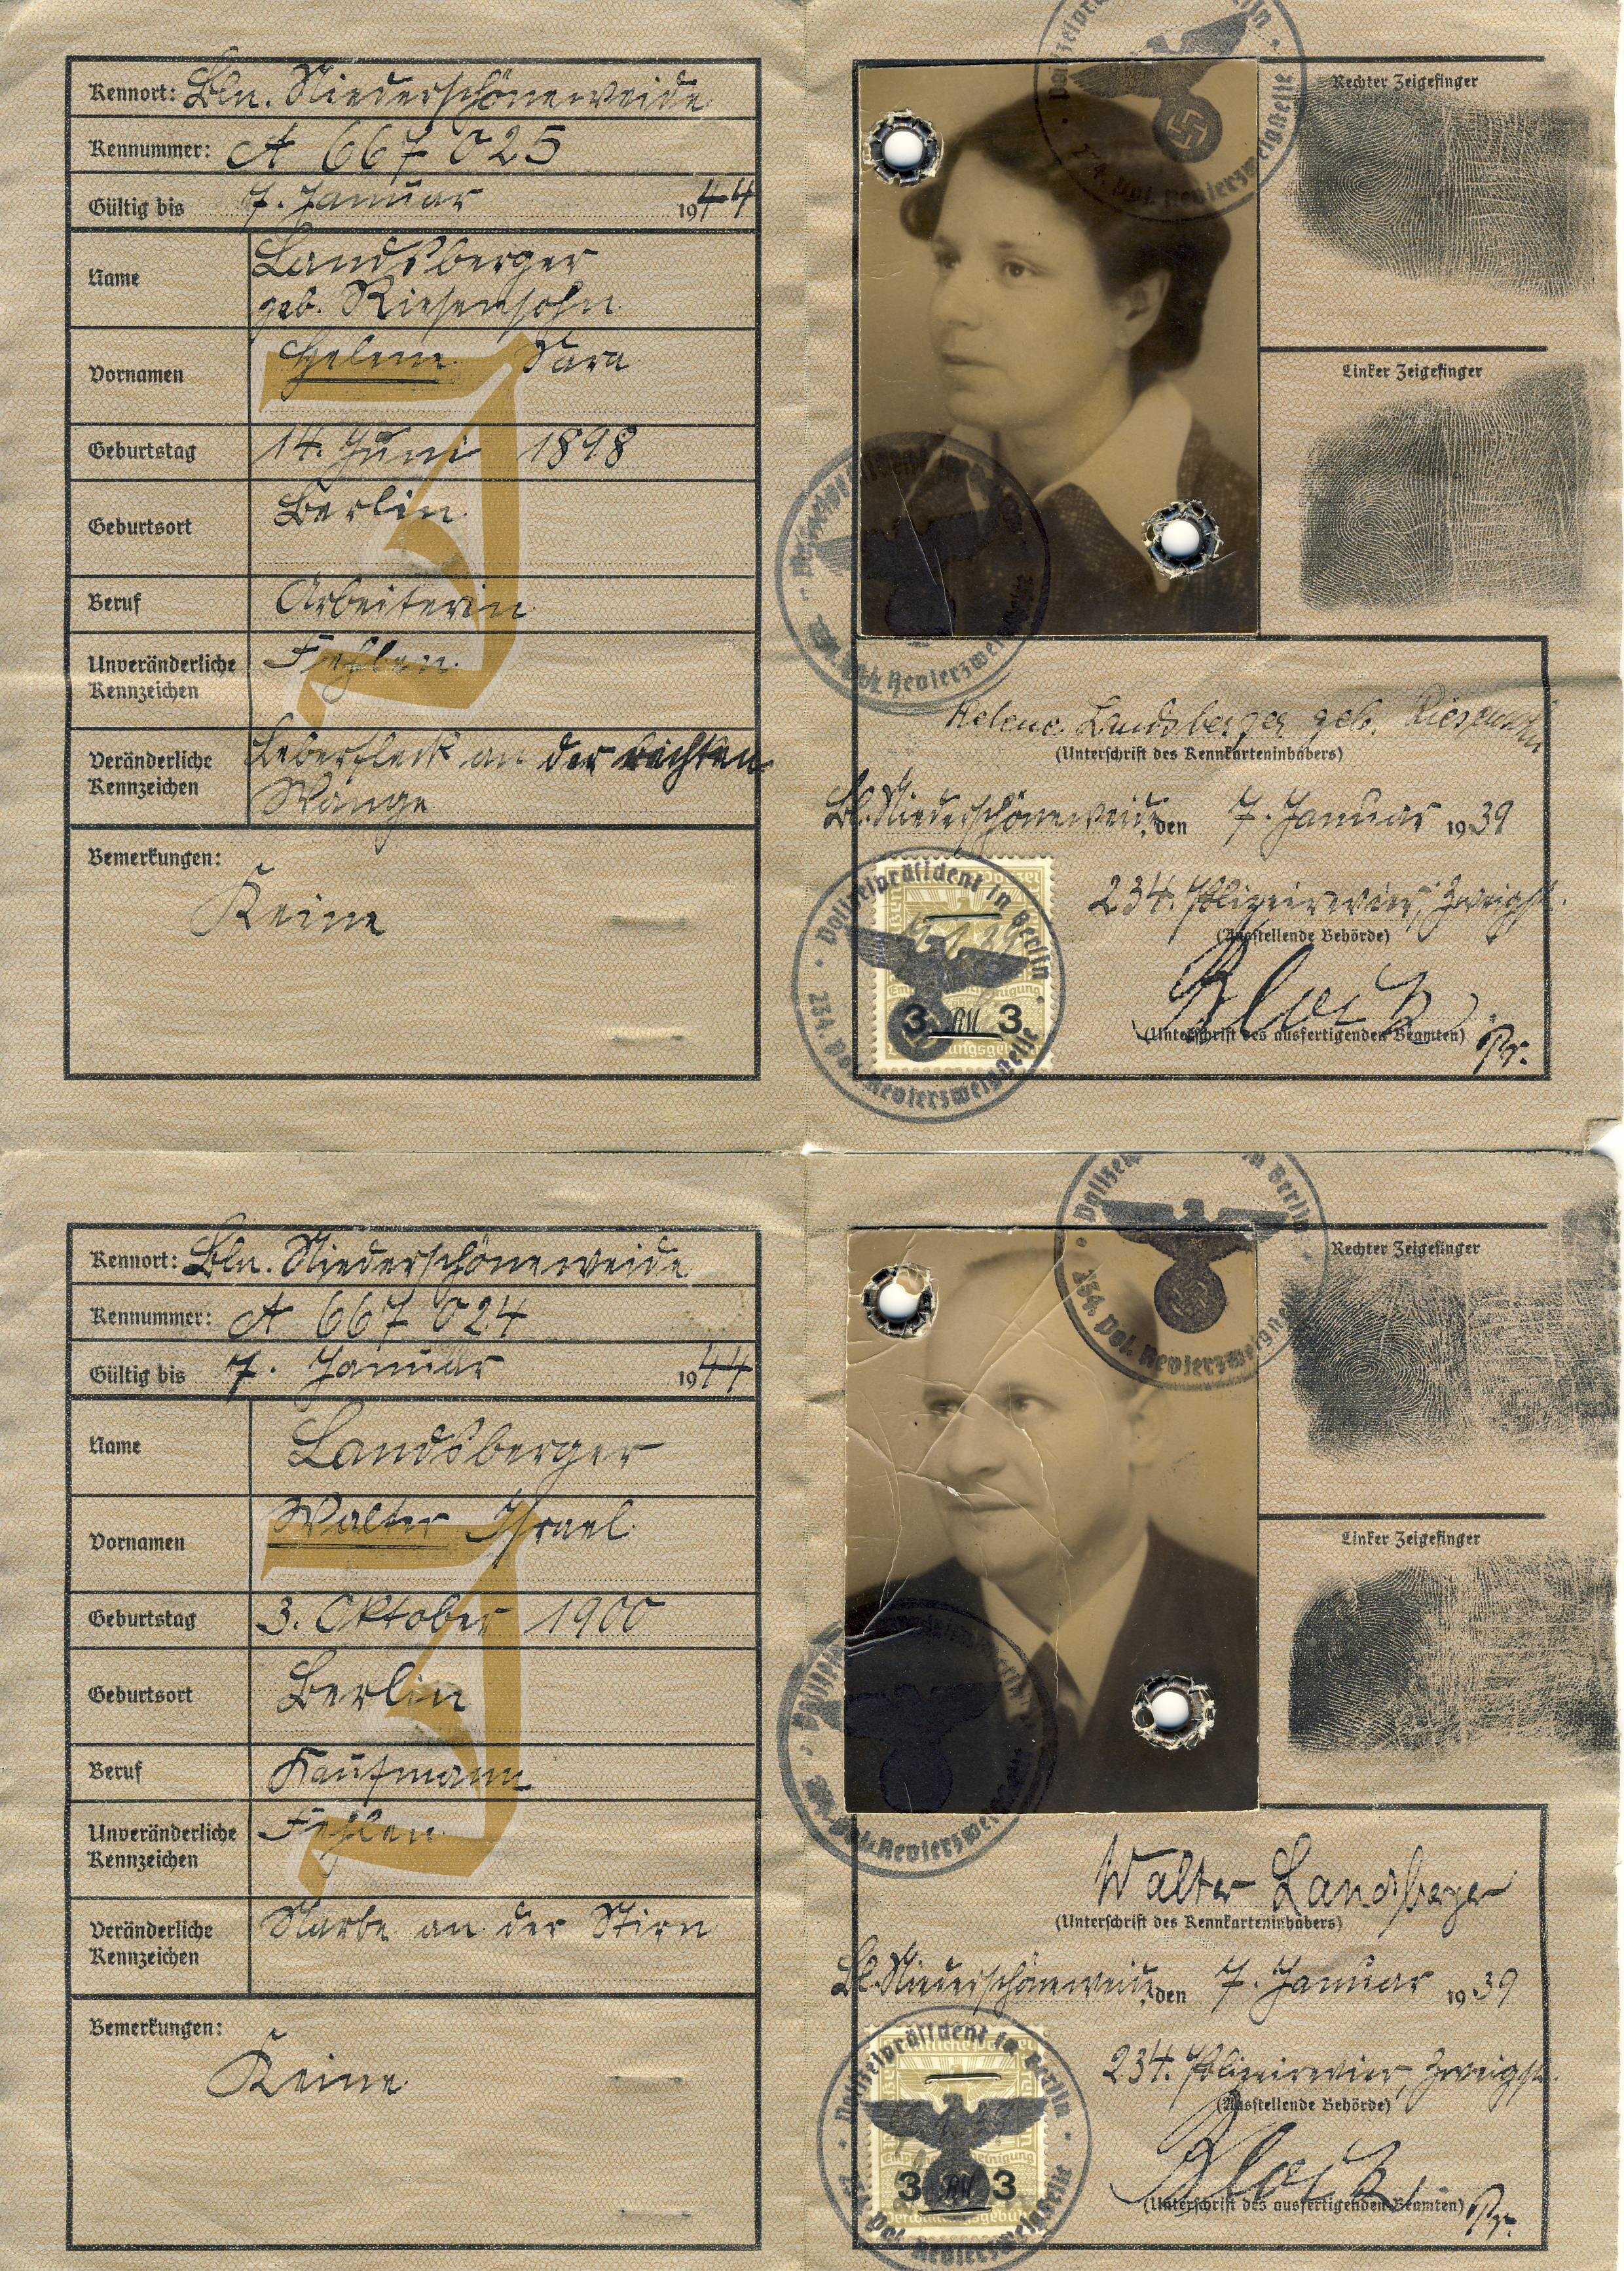 ID Papers Issued in Berlin